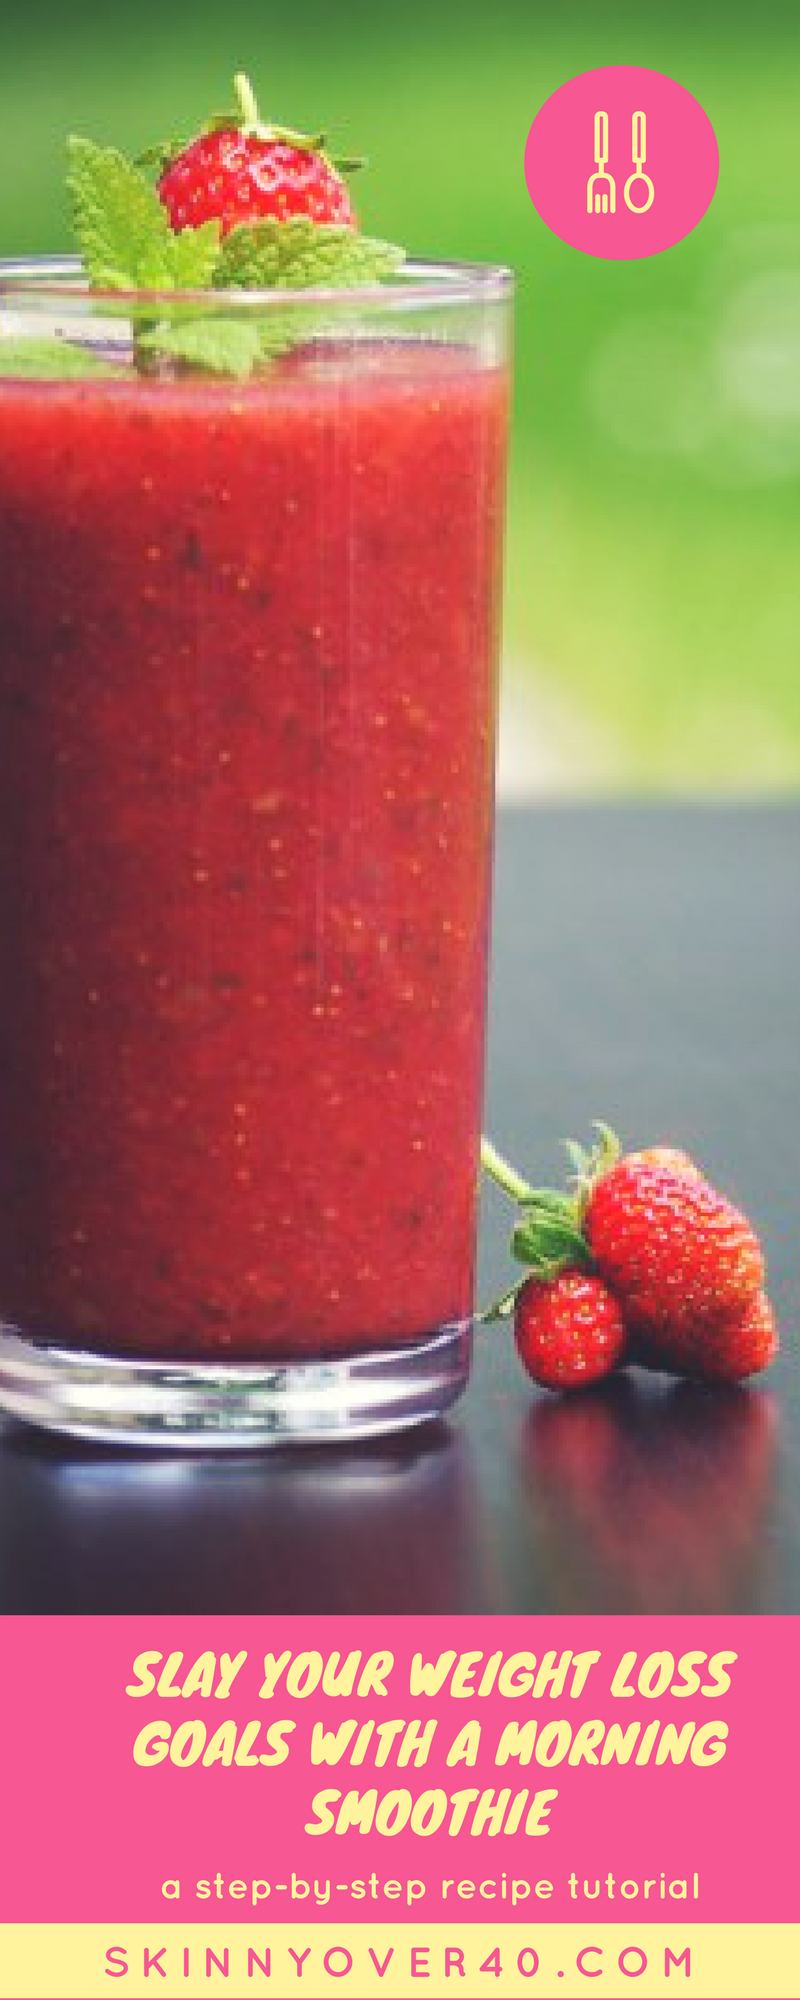 If your on a diet and are trying to lose weight, drink a smoothie in the morning that is high in protein, makes you feel full longer, helps with digestion and is high in fiber. This breakfast recipe is super easy! 